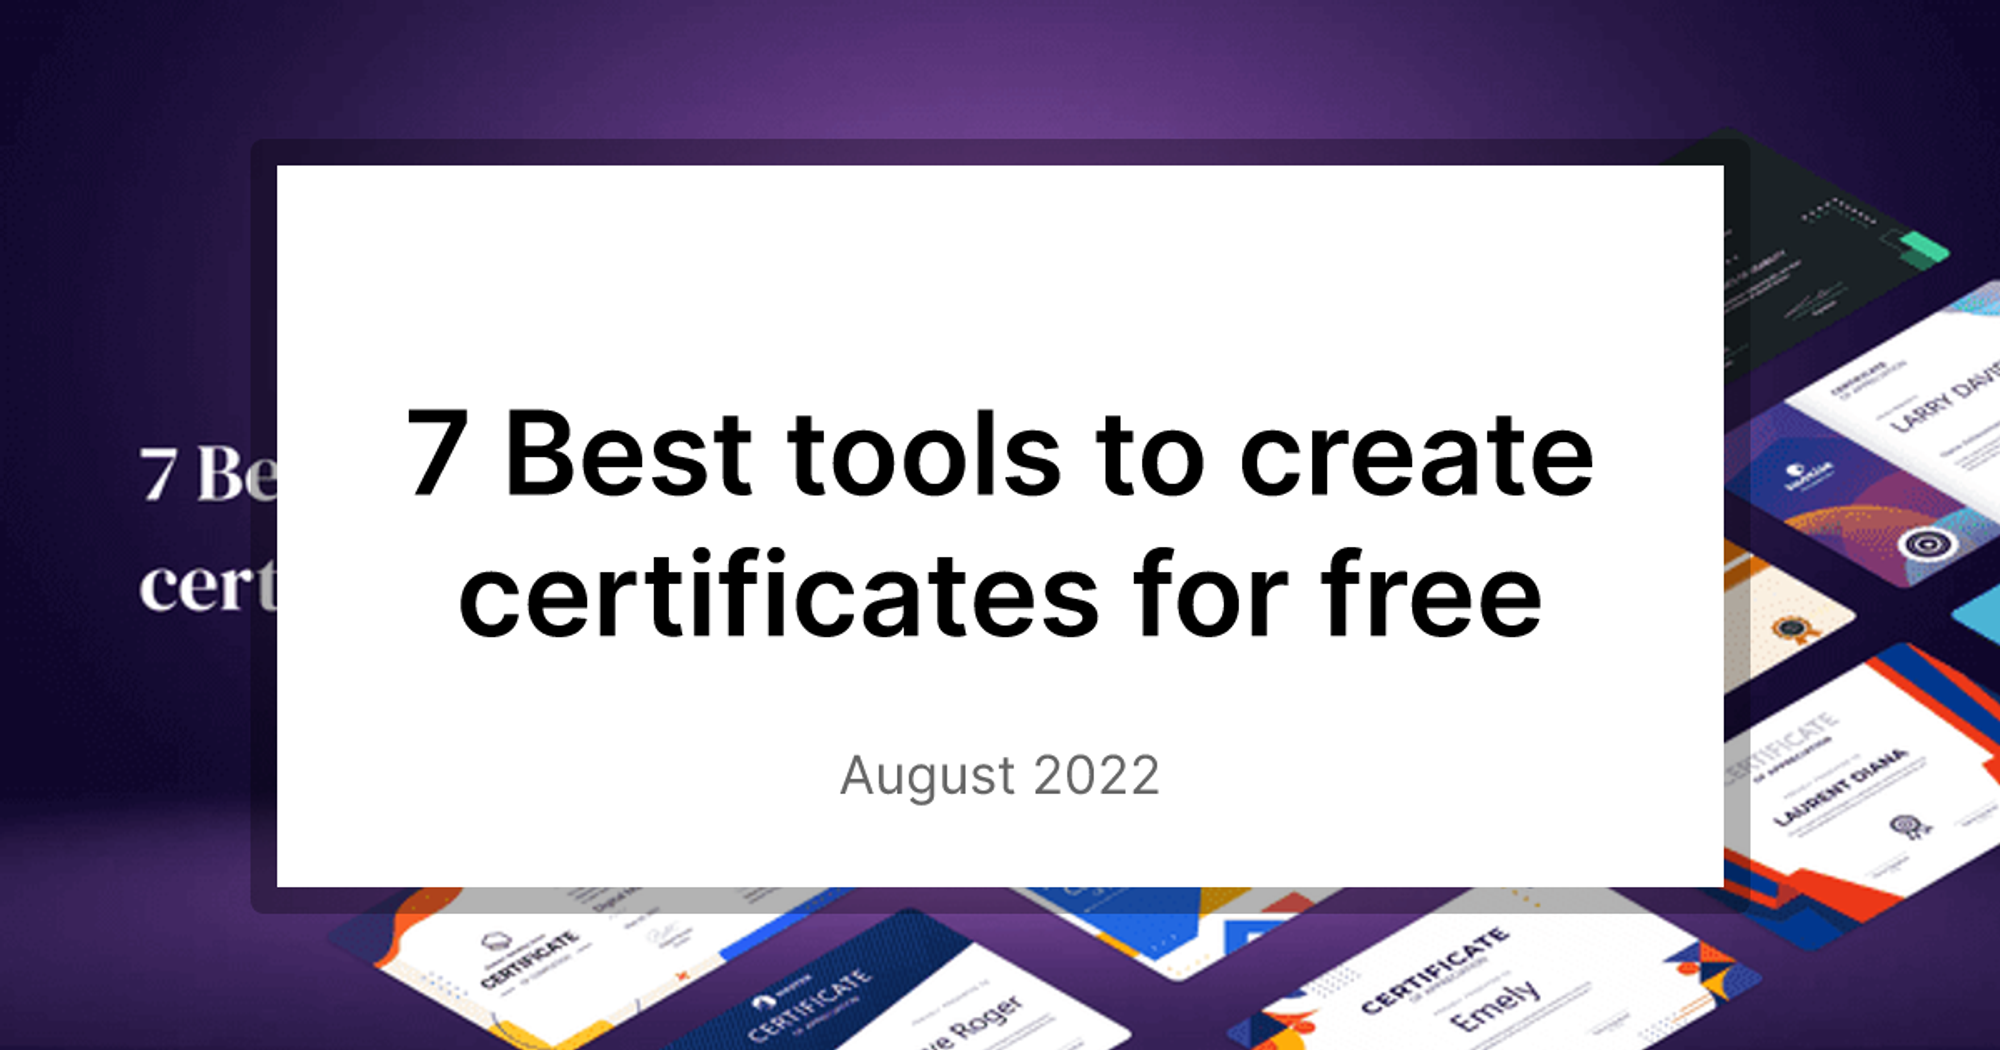 7 Best tools to create certificates for free